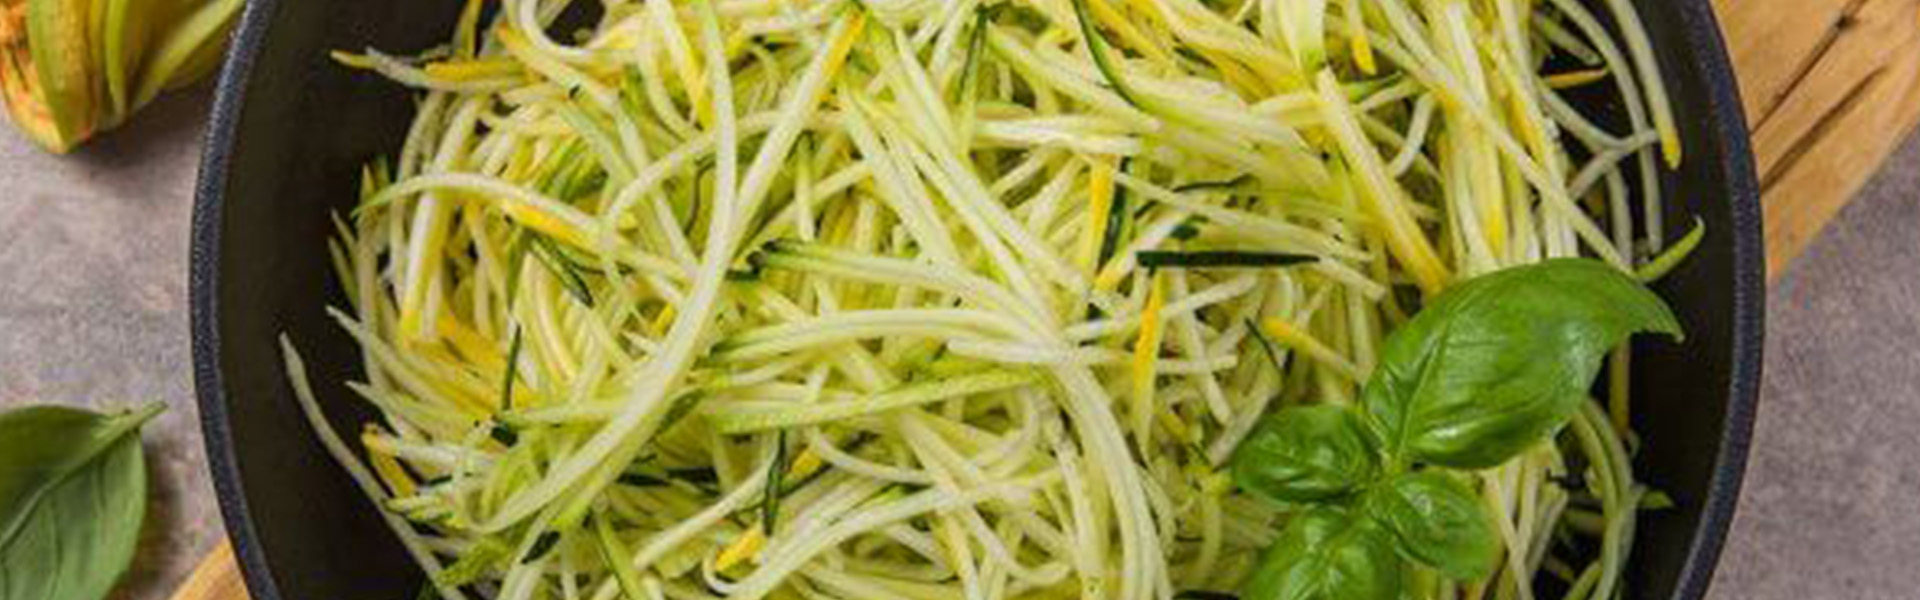 Zucchini Spaghetti (Zoodles) With Green Sauce